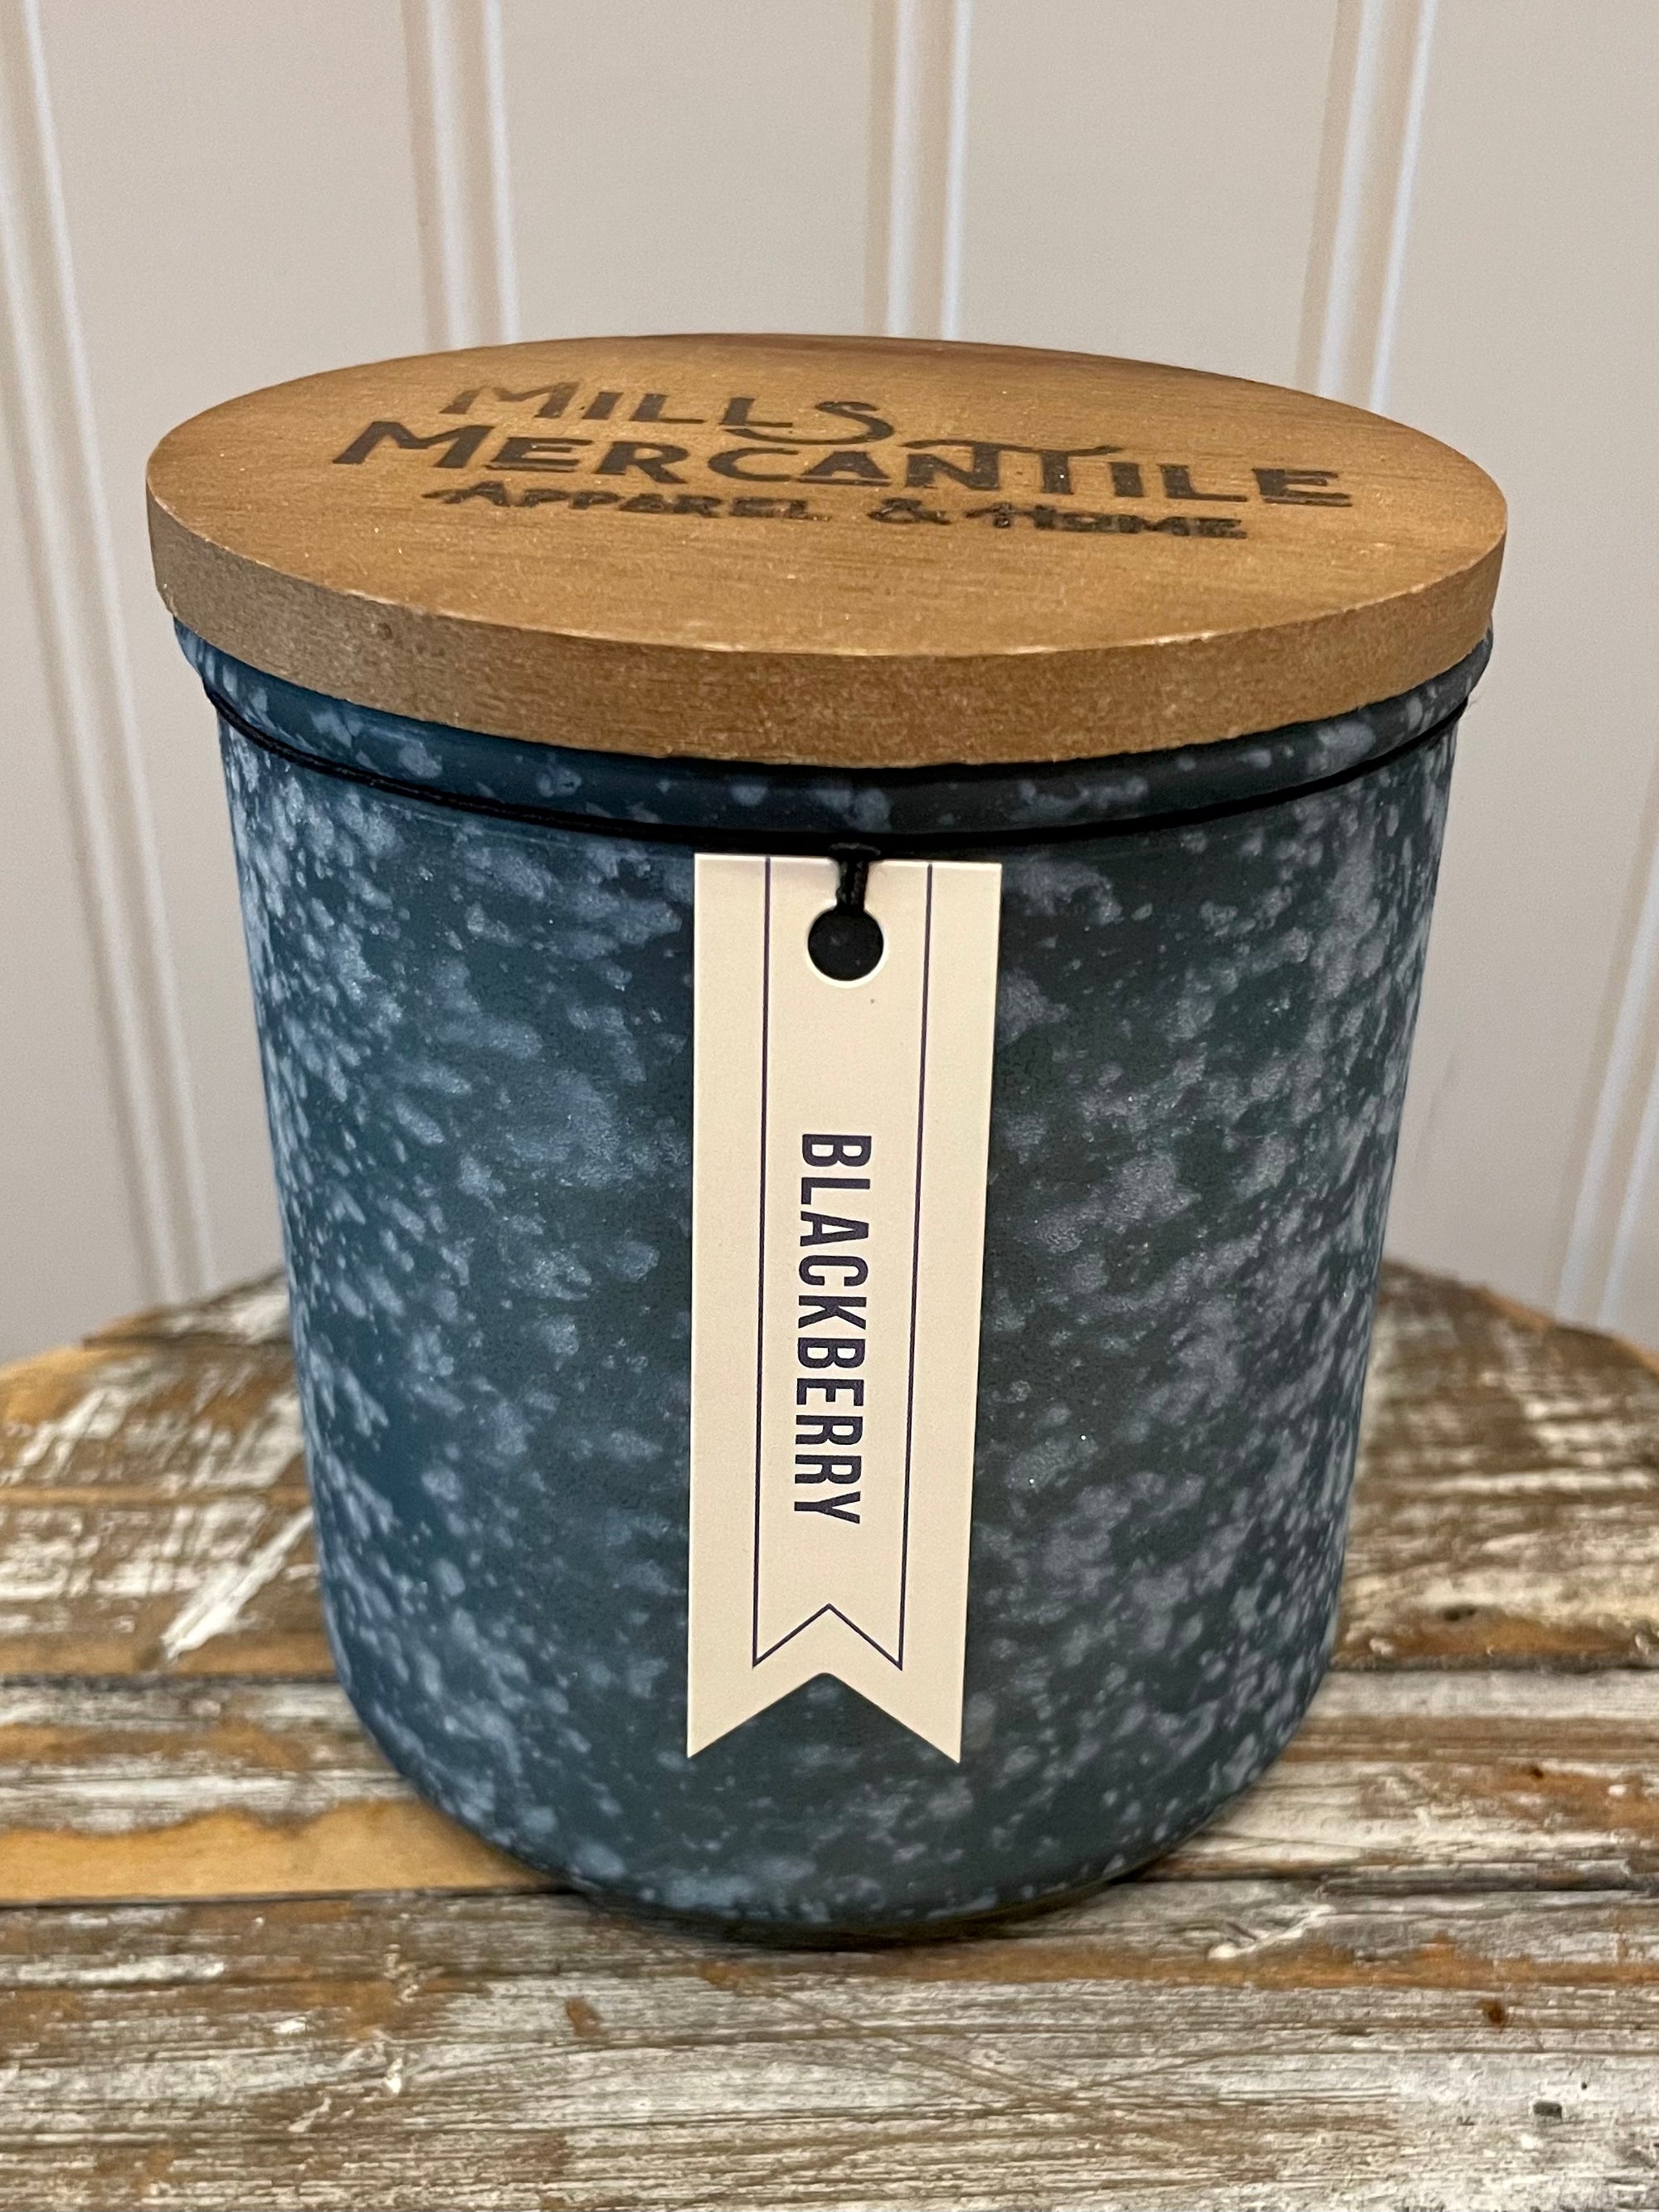 Mills Mercantile Candle - Blackberry Scent